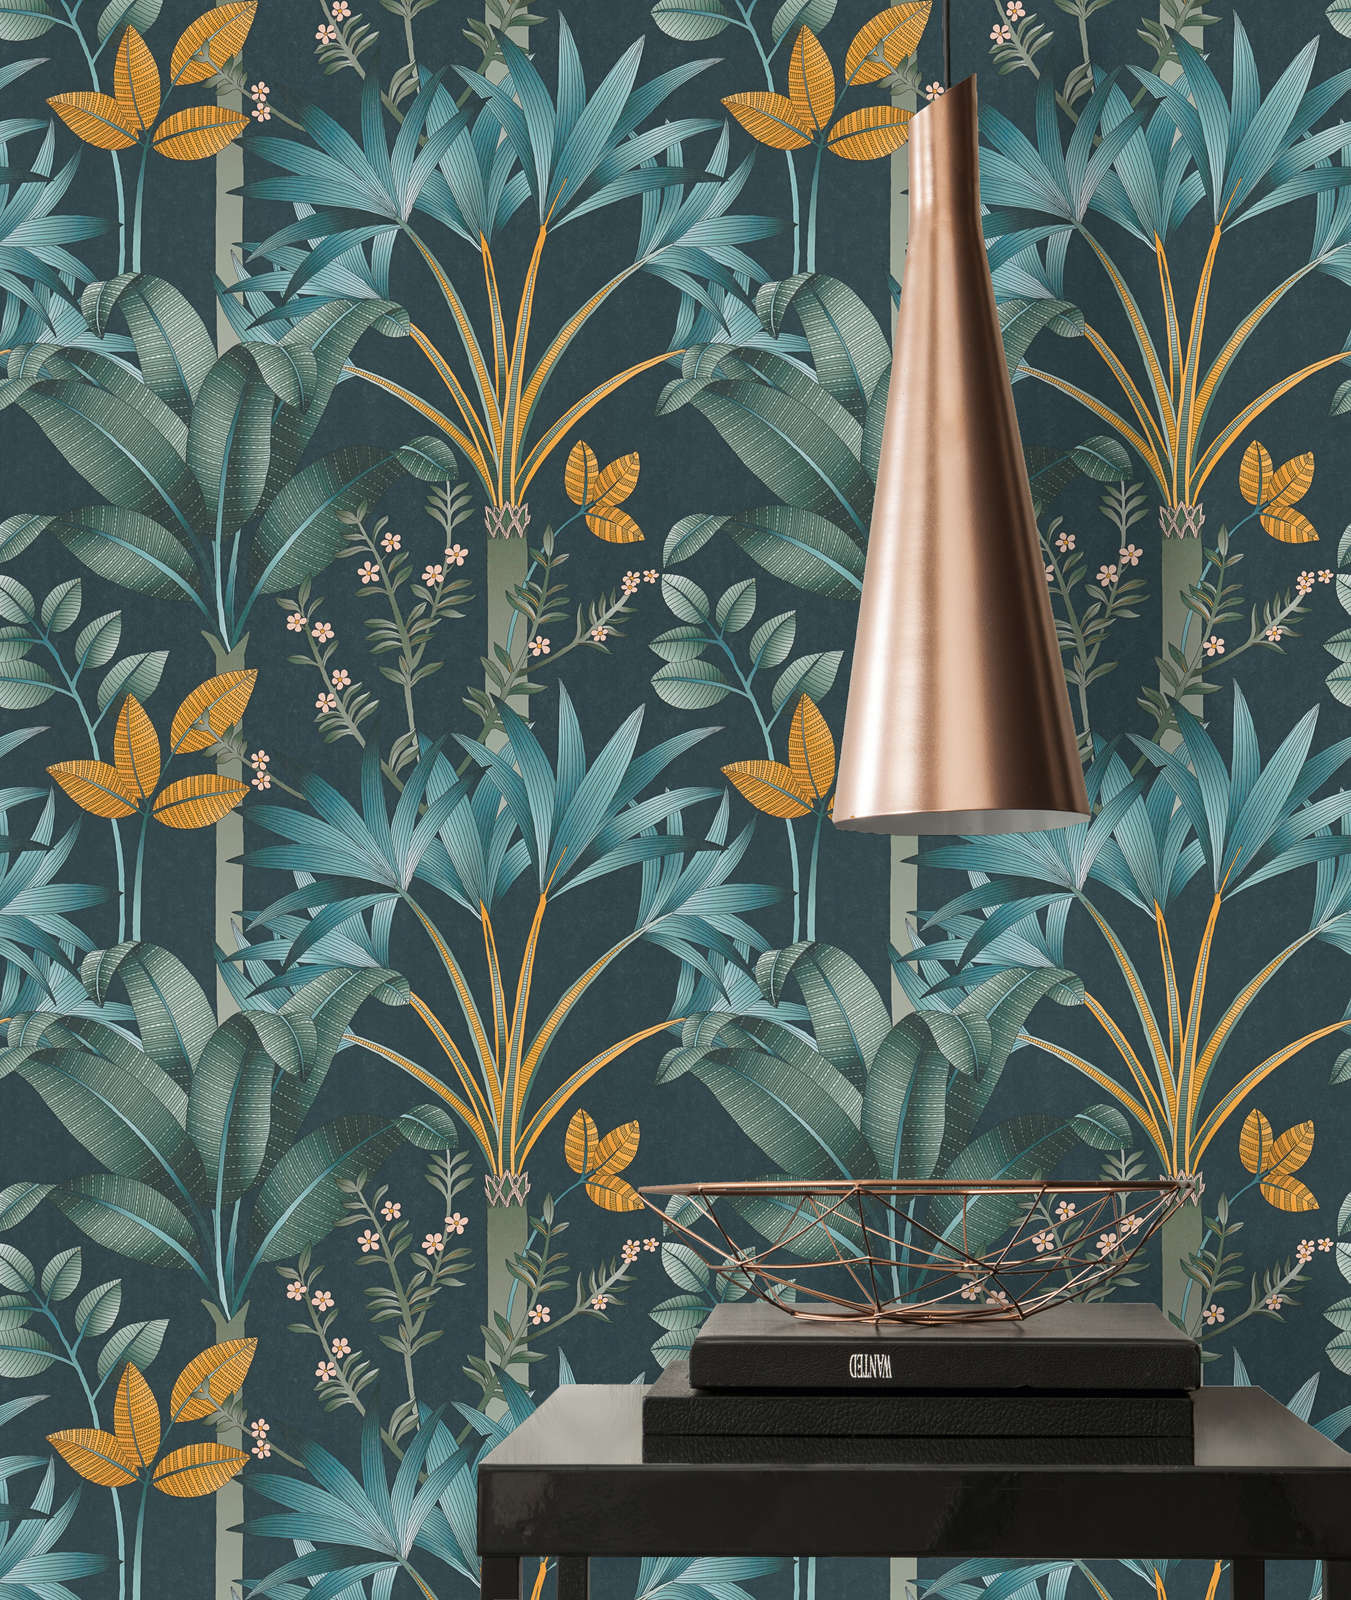             Floral non-woven wallpaper with leaf pattern - multicoloured, petrol, green
        